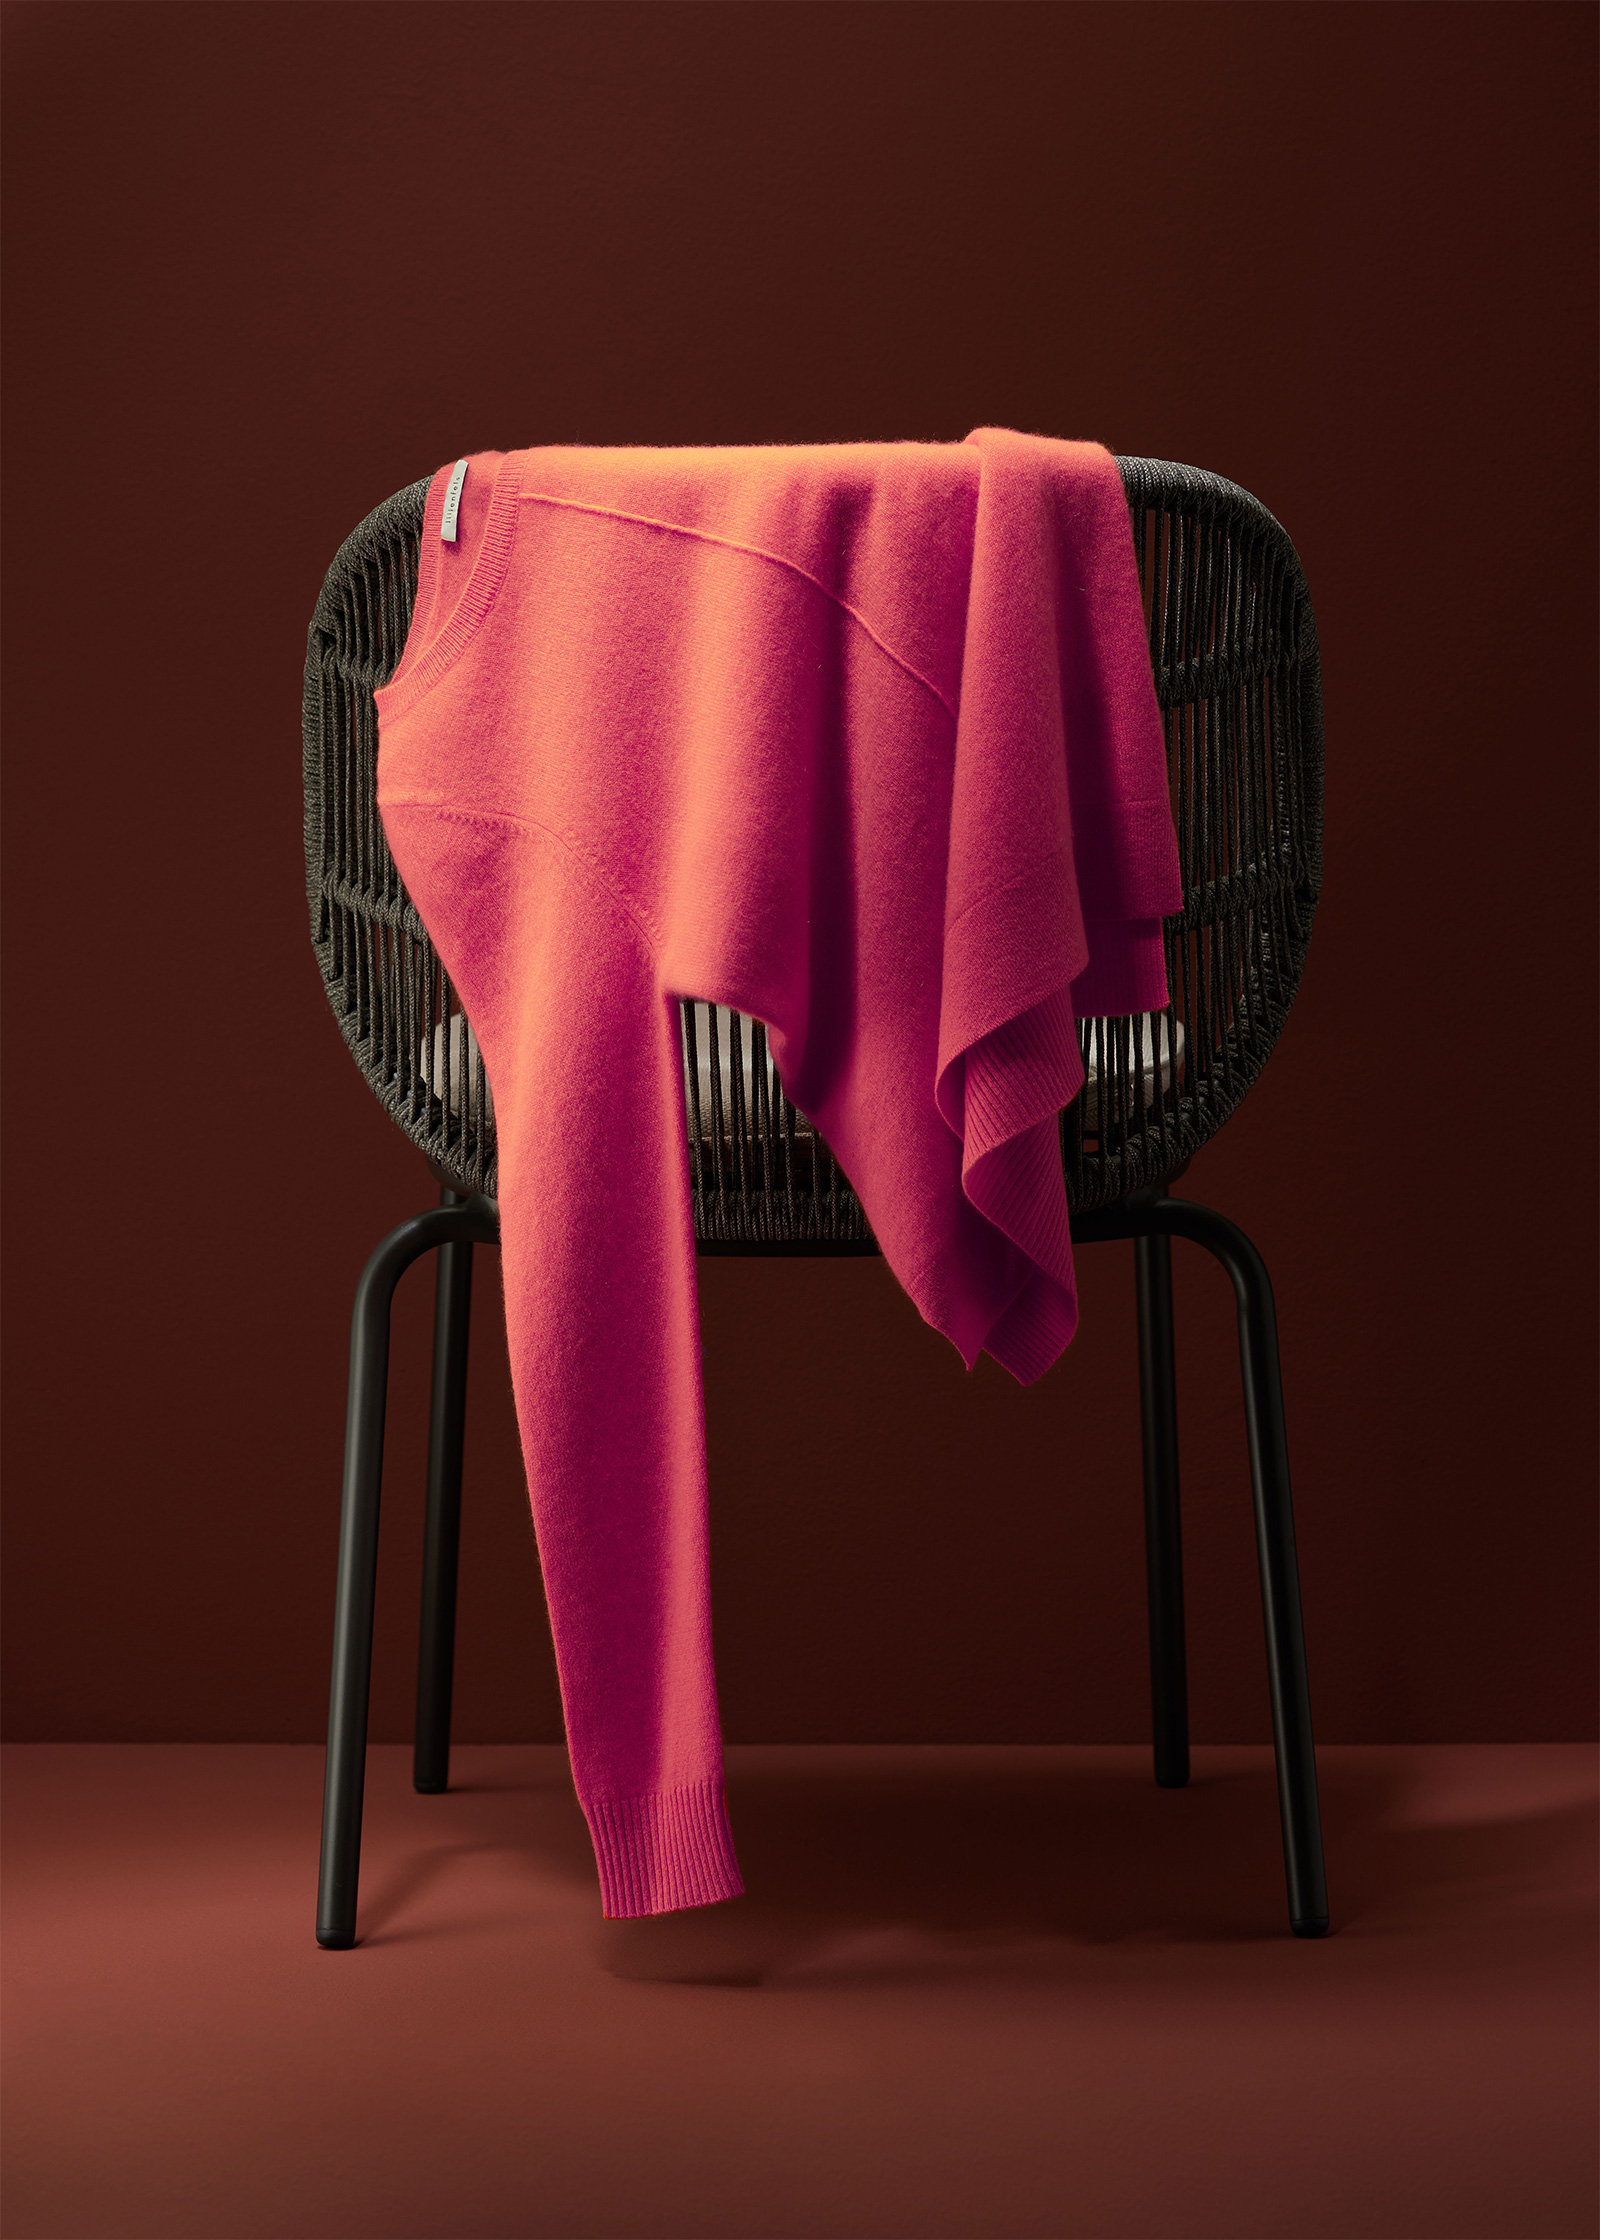 Breuninger Magazin Cashmere 2021, Stilllife, Styling, Photography, StillStyling, Product Styling, Setting up, Props, Concept, Campaign